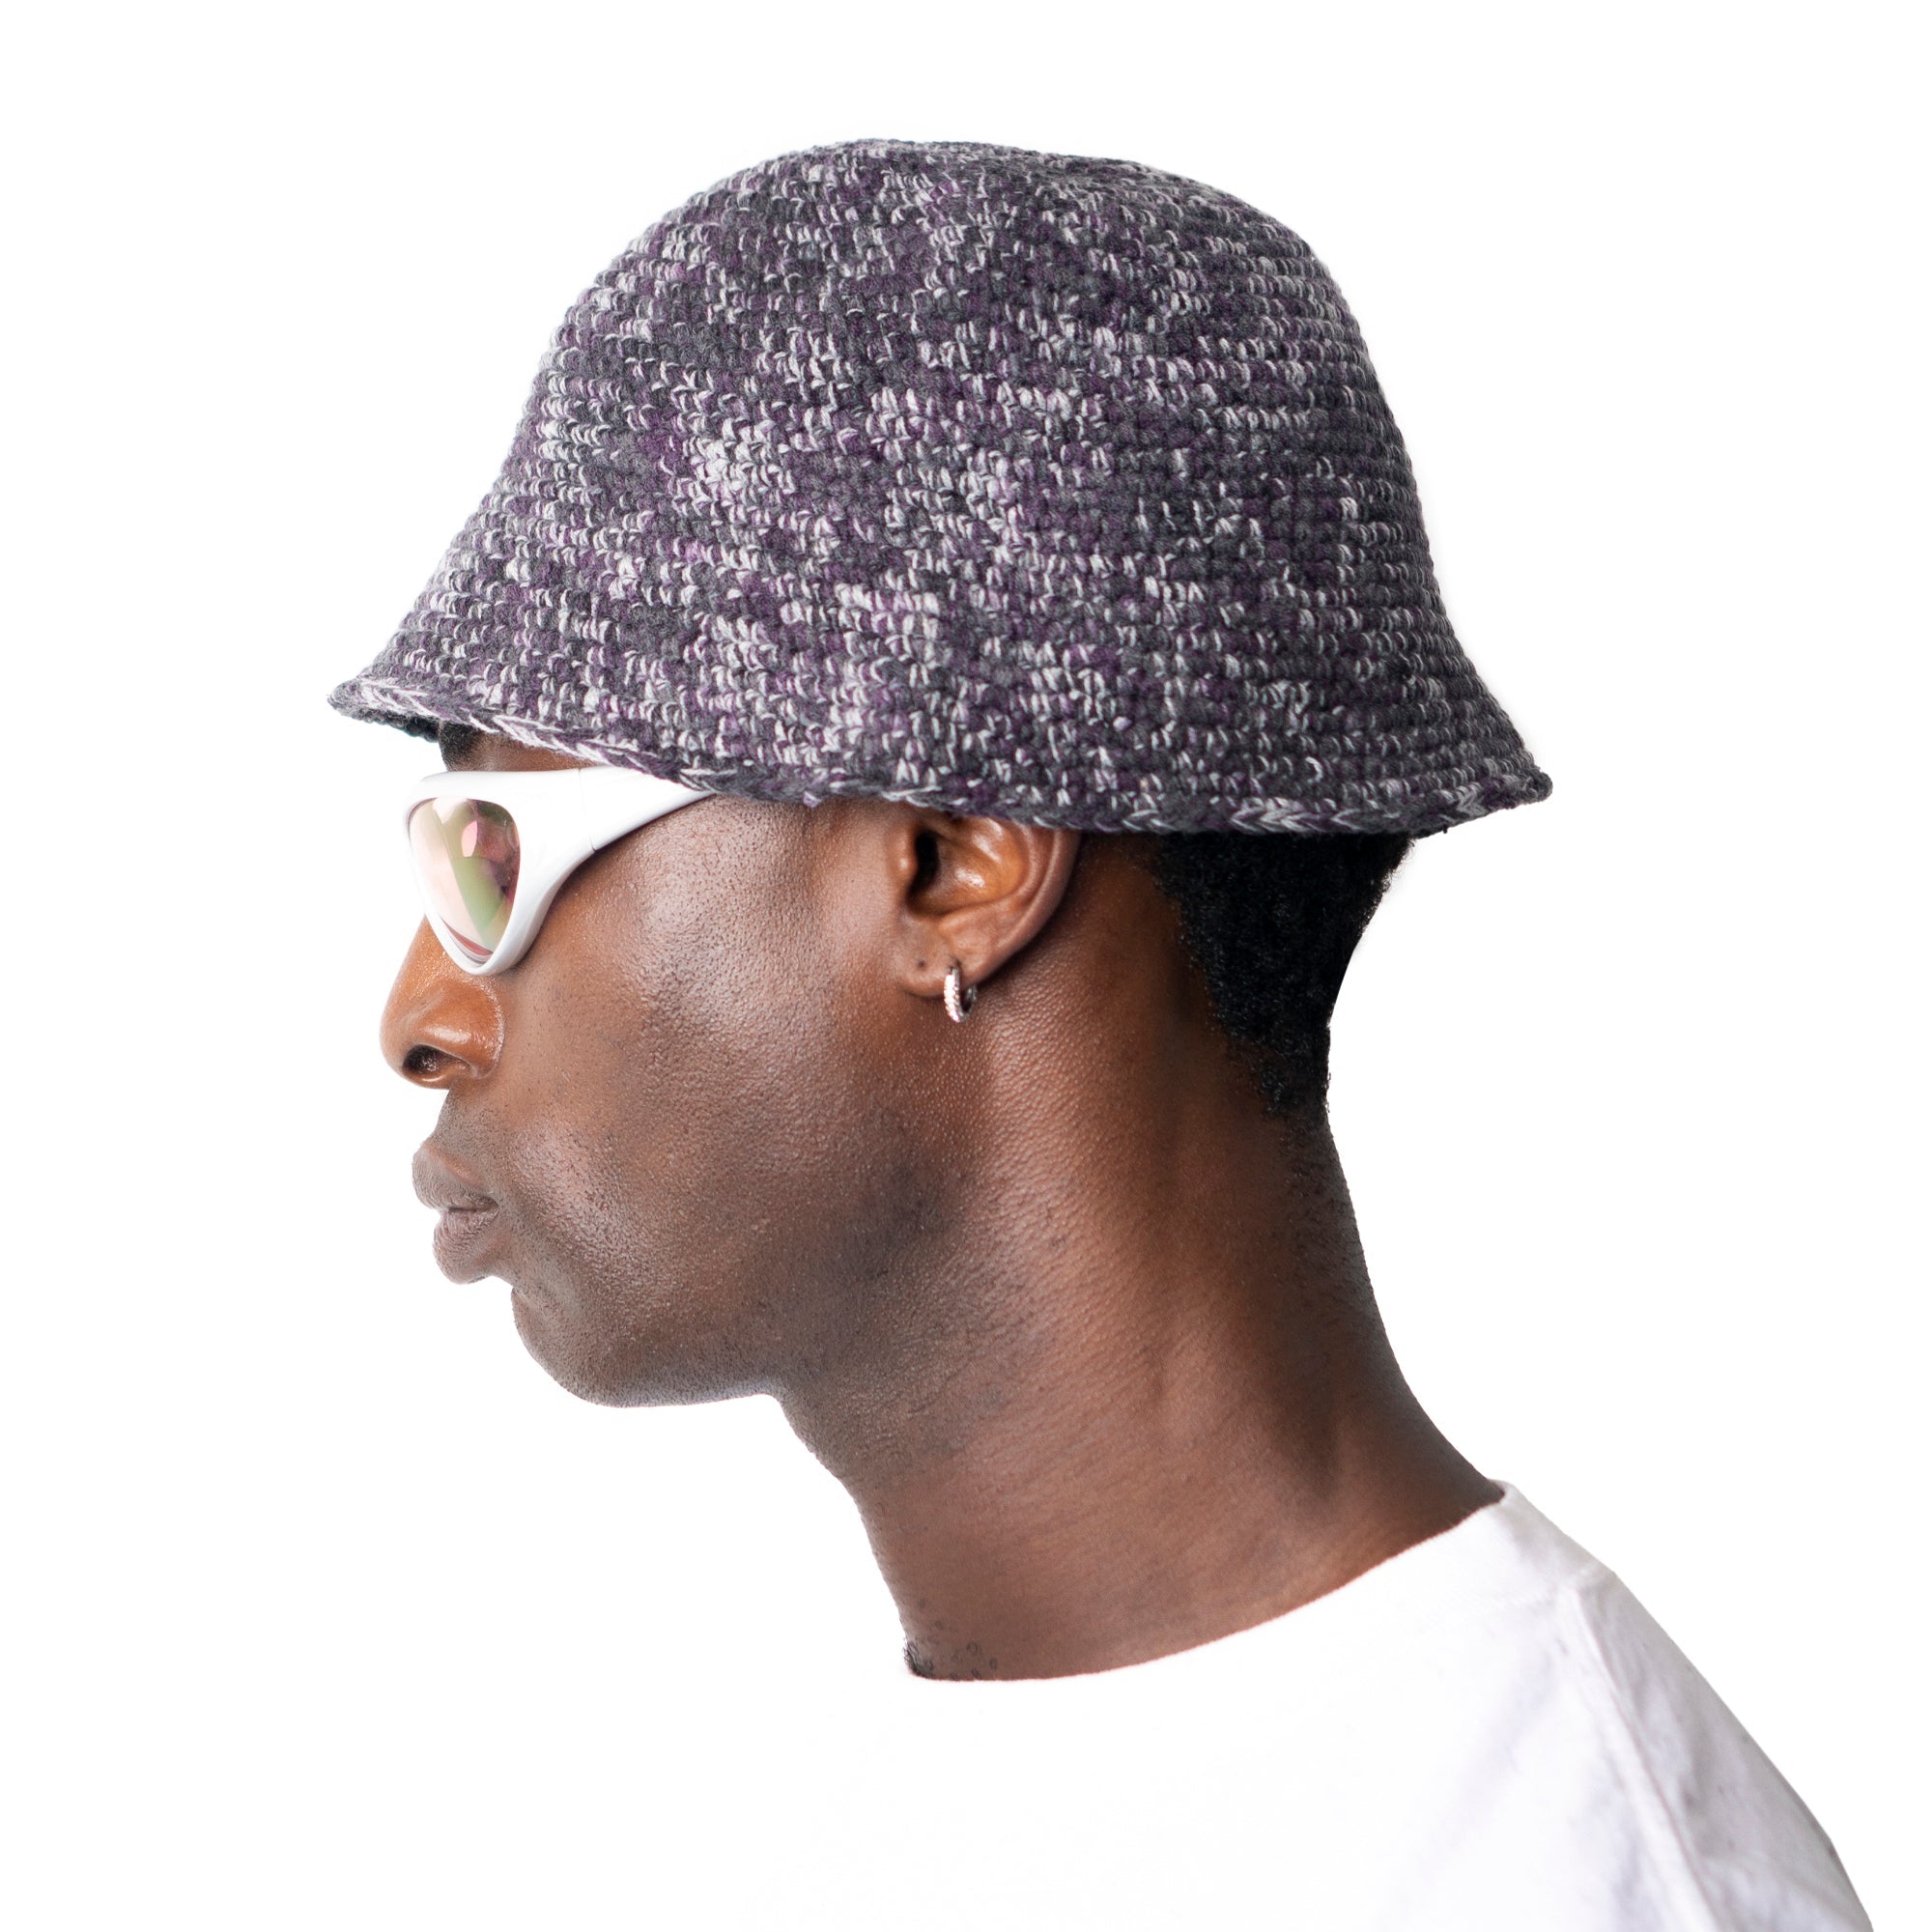 Add to your style or protect yourself from the sun with the ® Phantom Core Hat - HEADWEAR - Canada